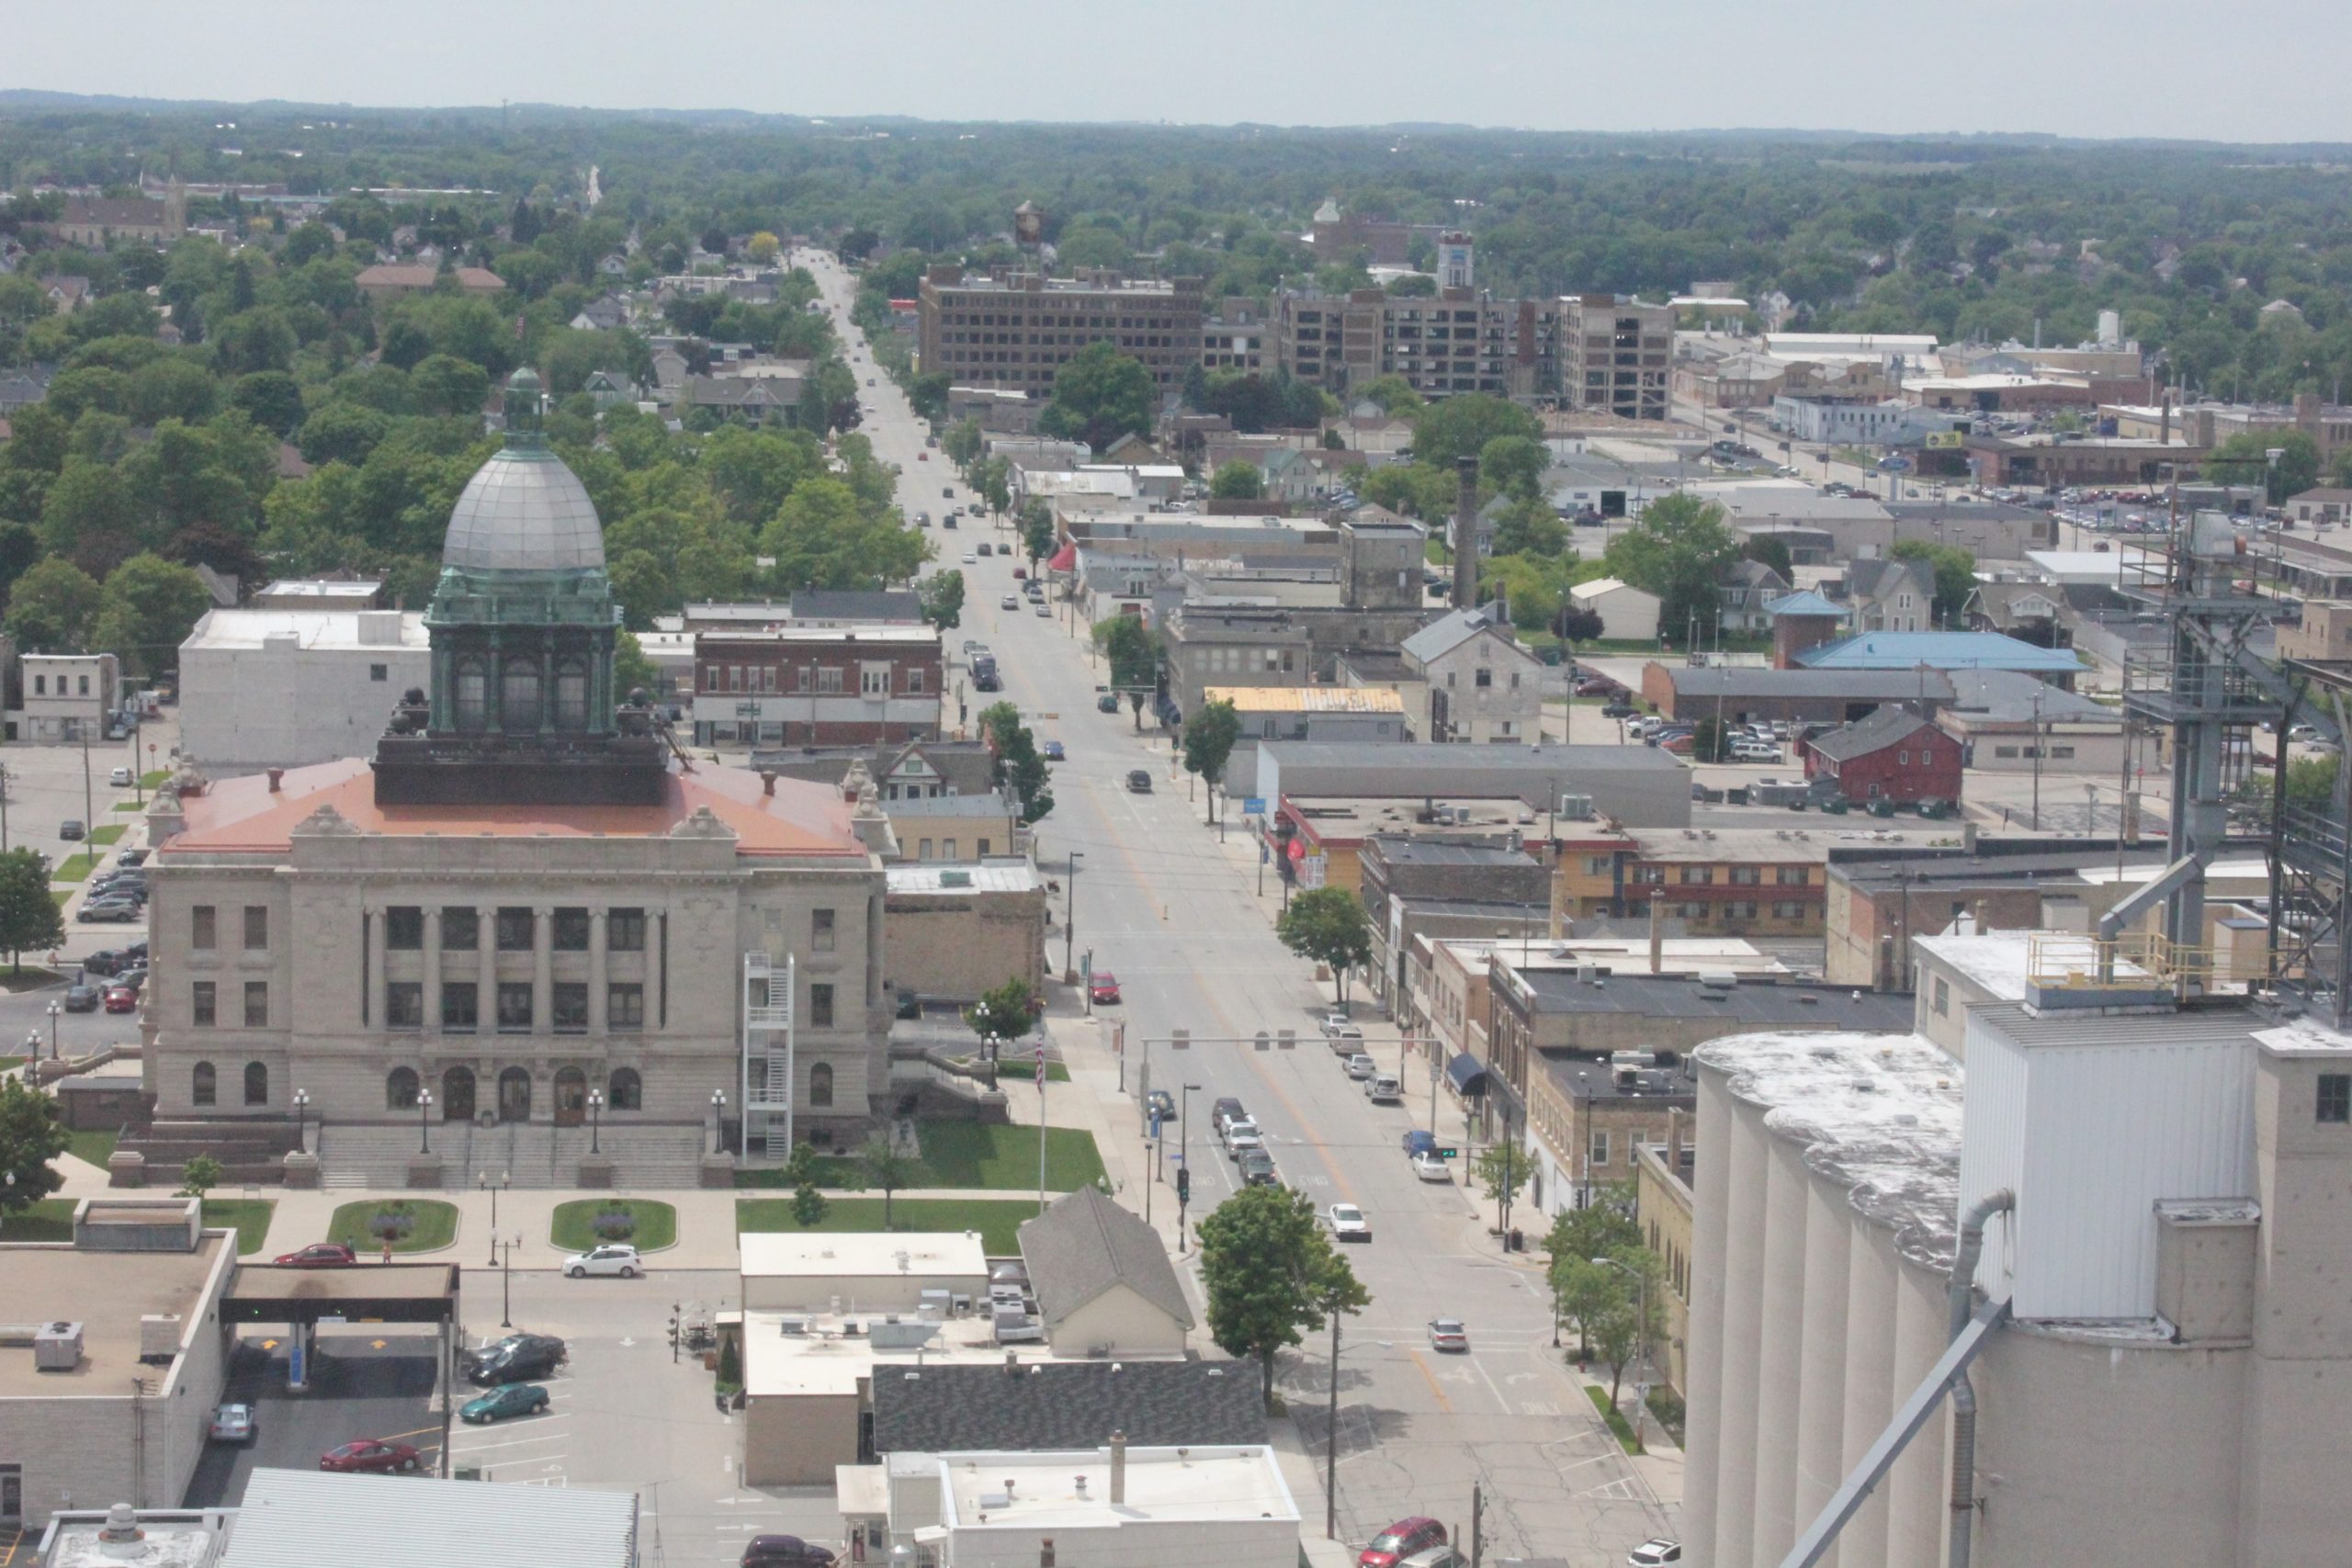 The Briess Elevator offers one of the highest views of  the city of Manitowoc.